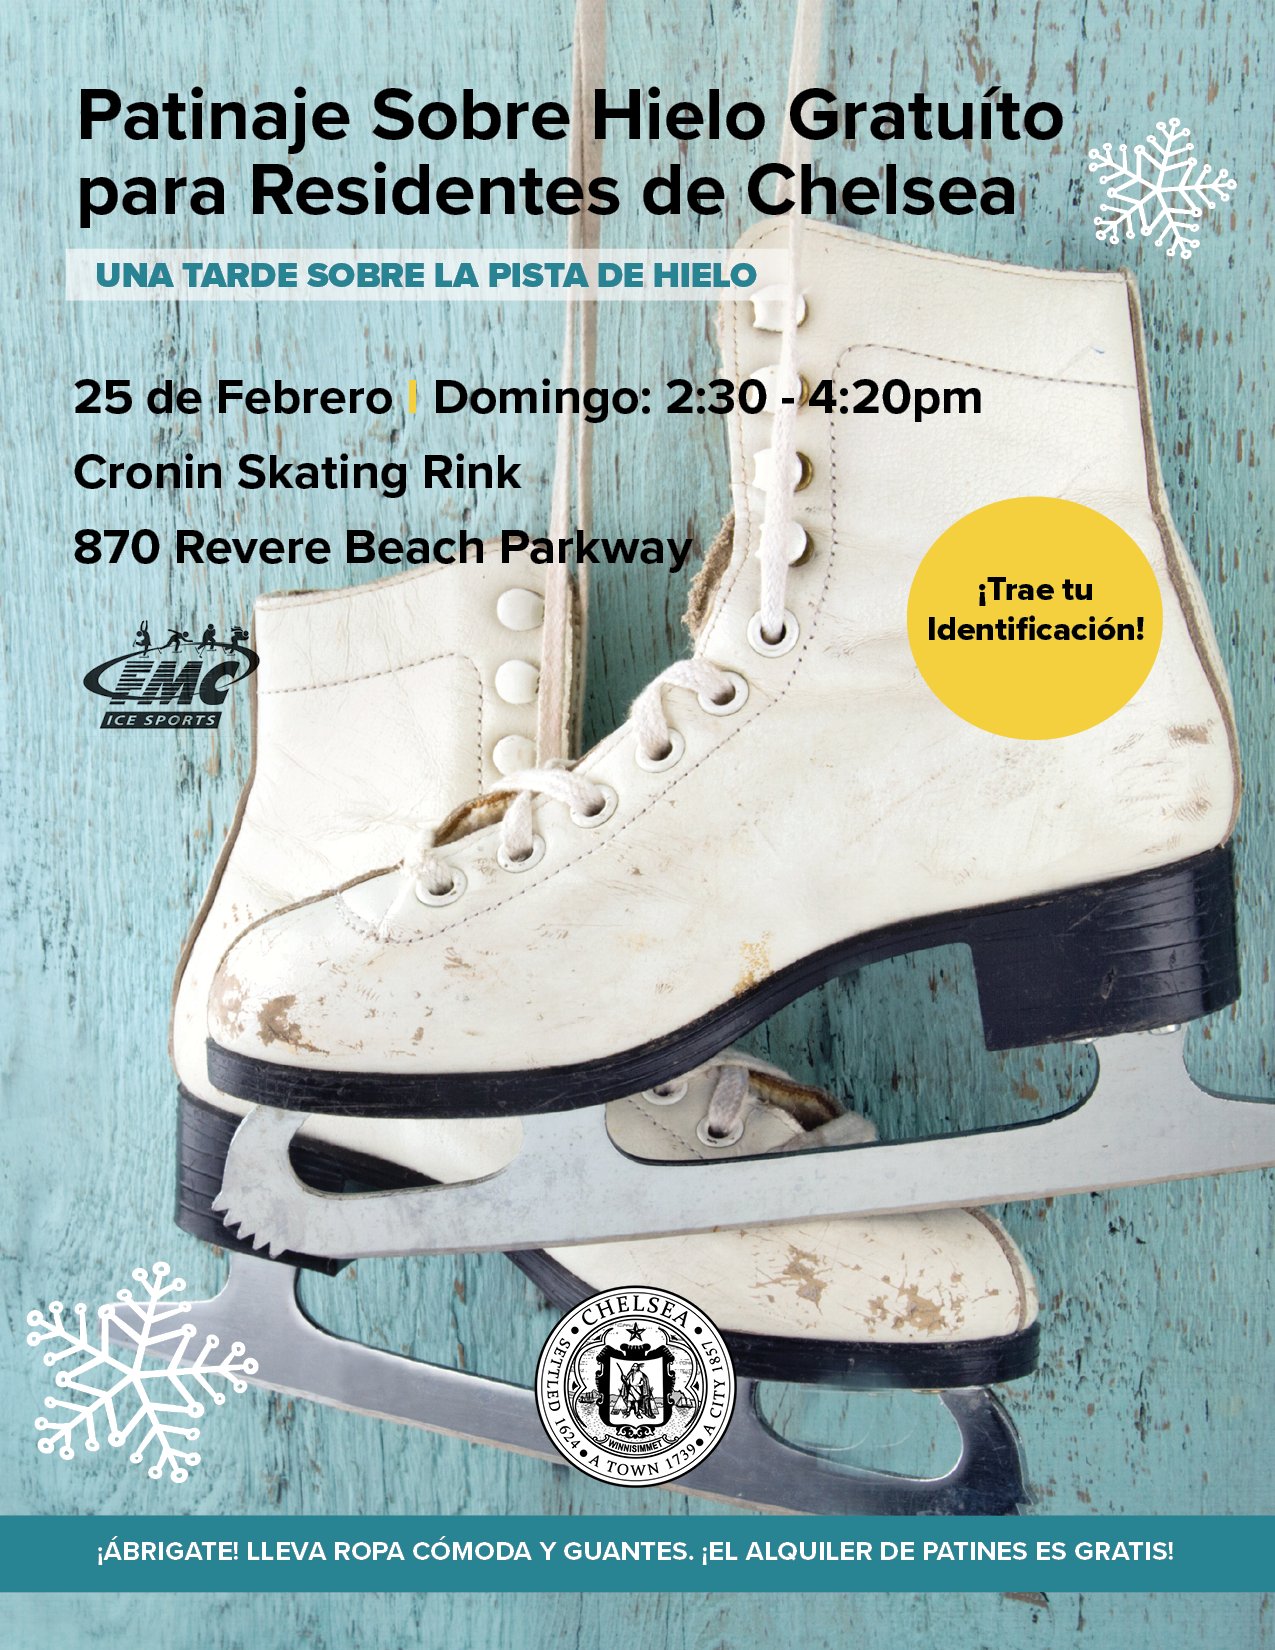 Chelsea Schools on X: This Sunday, February 25, at Cronin Skating Rink  (870 Revere Beach Parkway), Chelsea residents can skate for free from  2:30pm-4:20pm! Renting skates is free for families. Children must